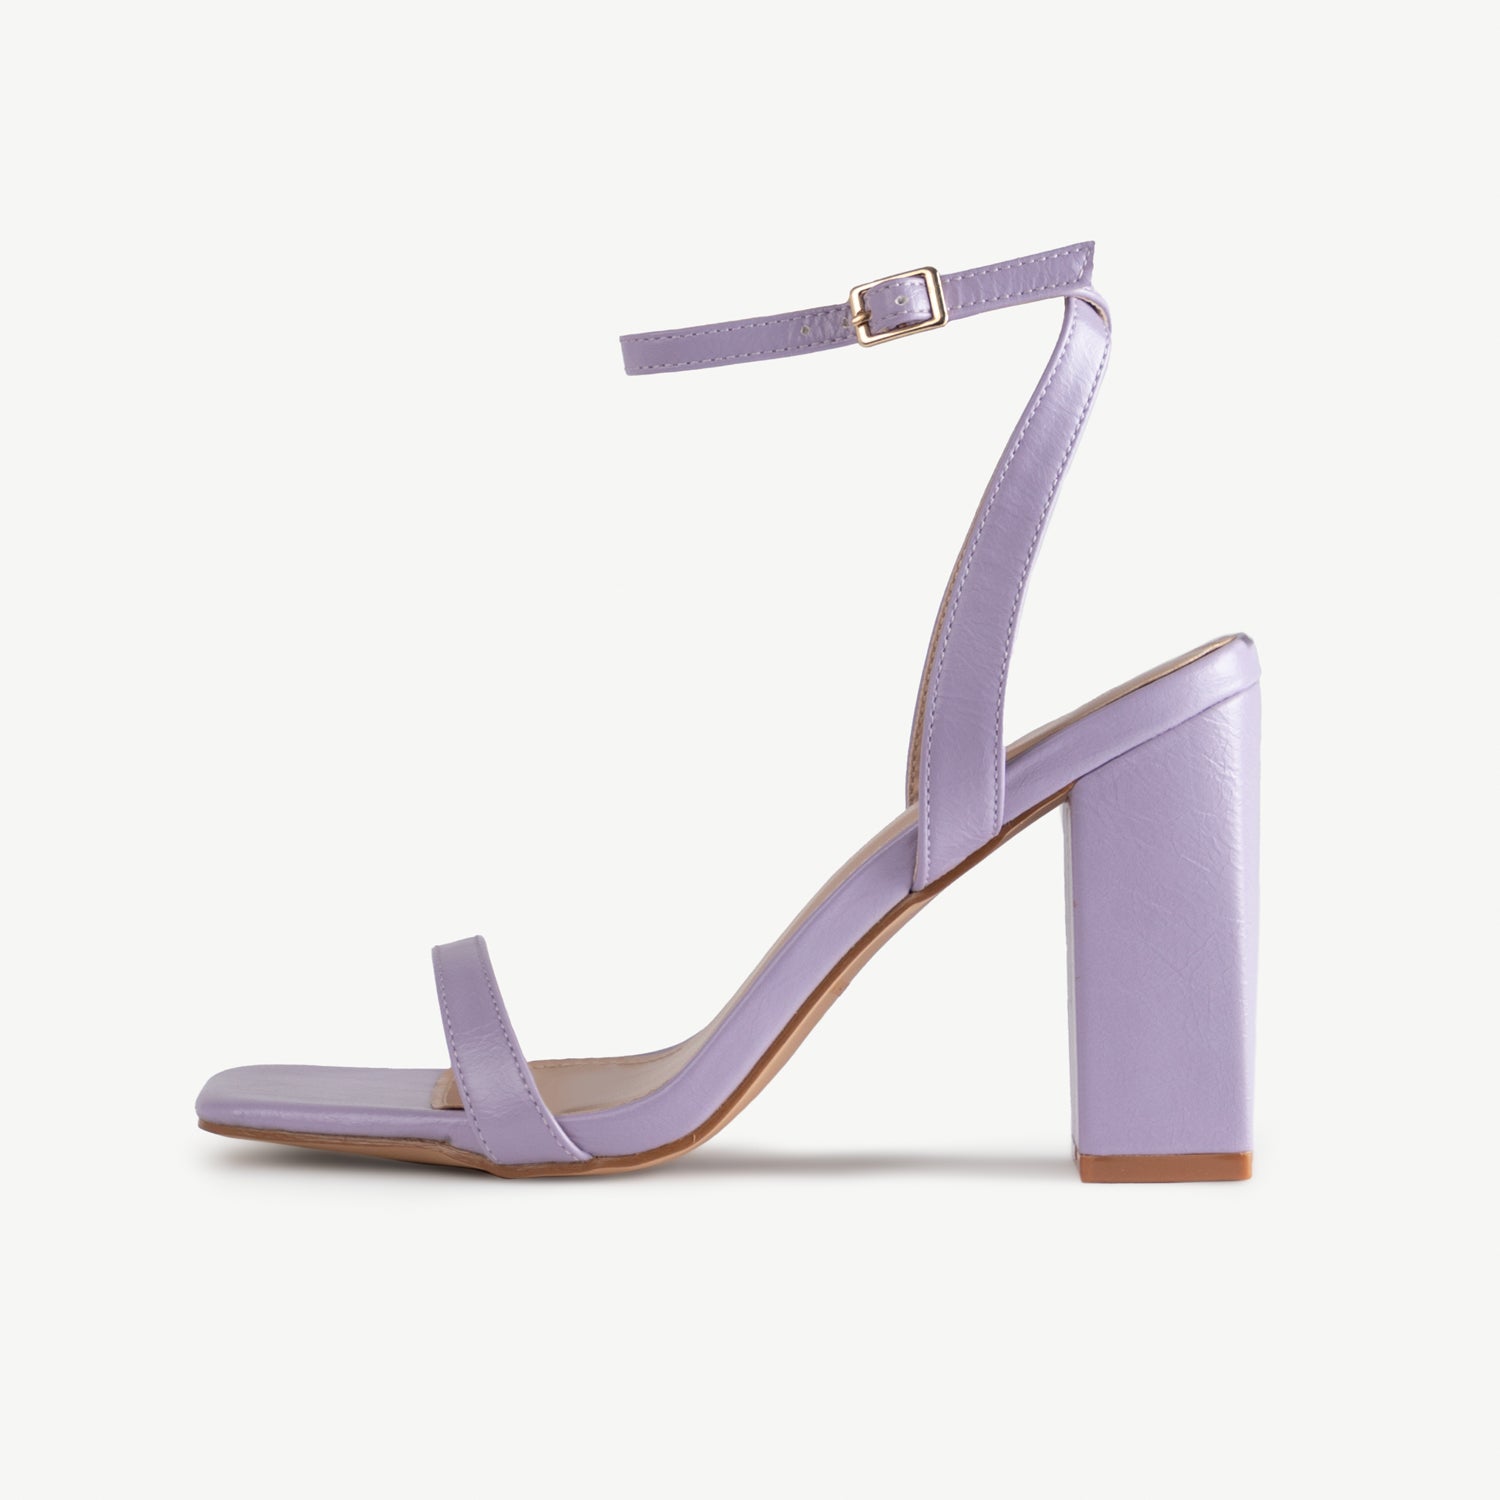 5 Shoe Styles You Need To Try This Summer - Society19 UK | Sandals heels,  Fashion heels, Lilac heels